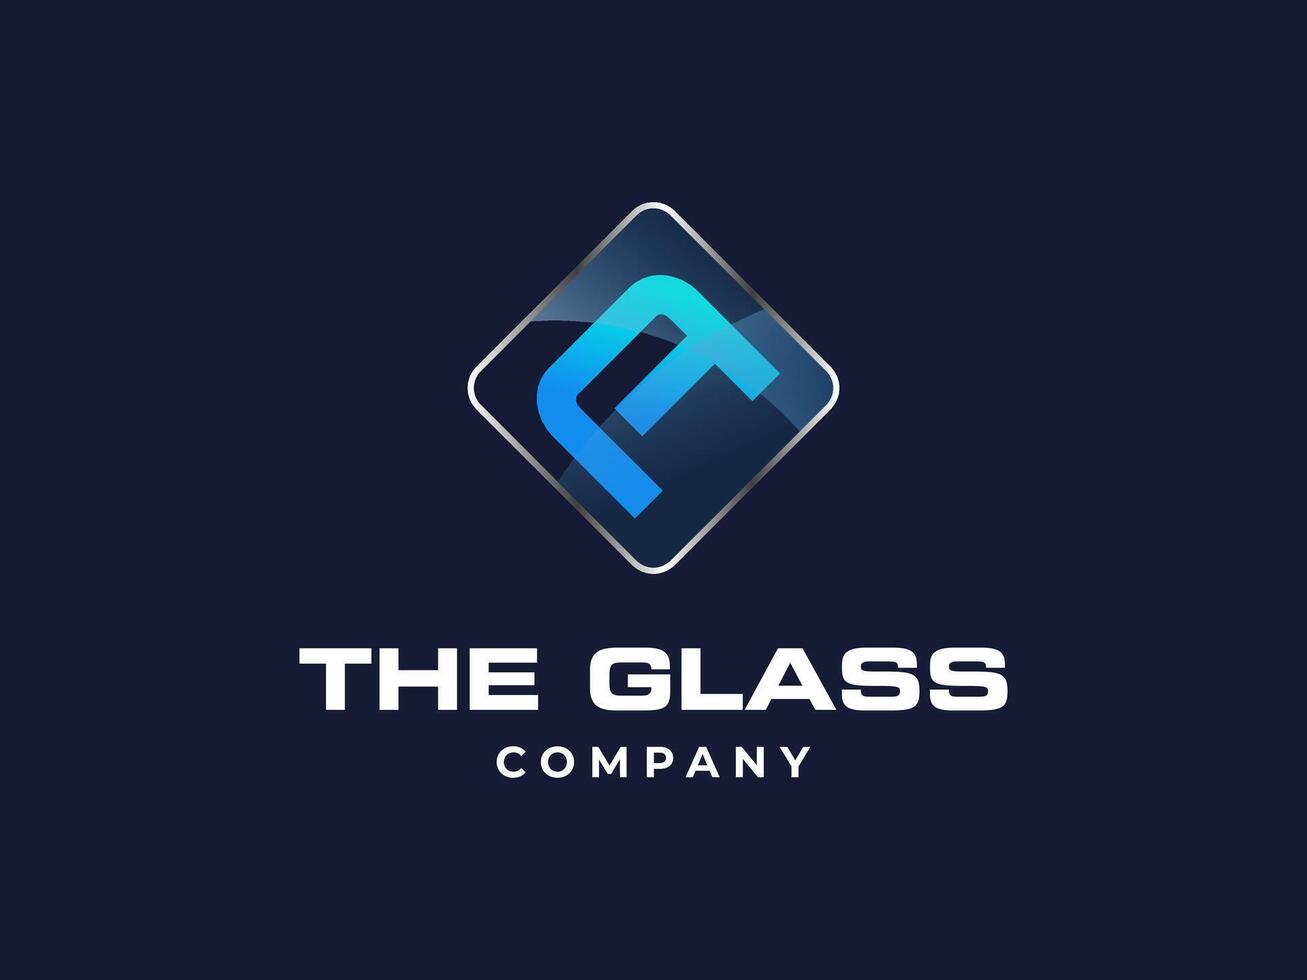 Letter A glass service company icon, vector blue crystal glass works symbol or construction